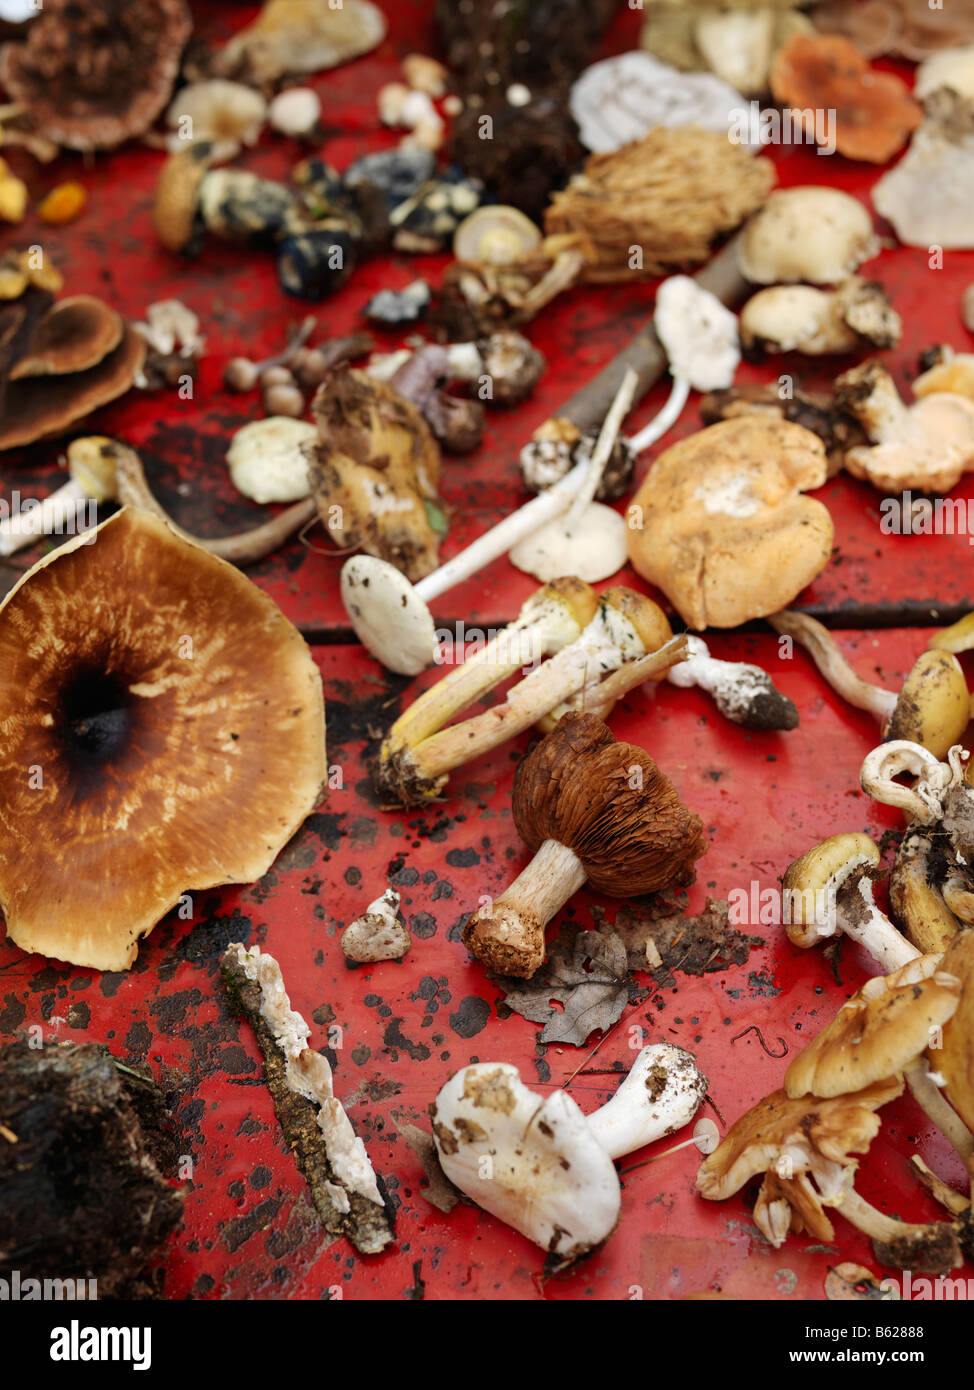 A variety of mushrooms found in the hills of Rosendale NY during a mushroom hunt. Stock Photo